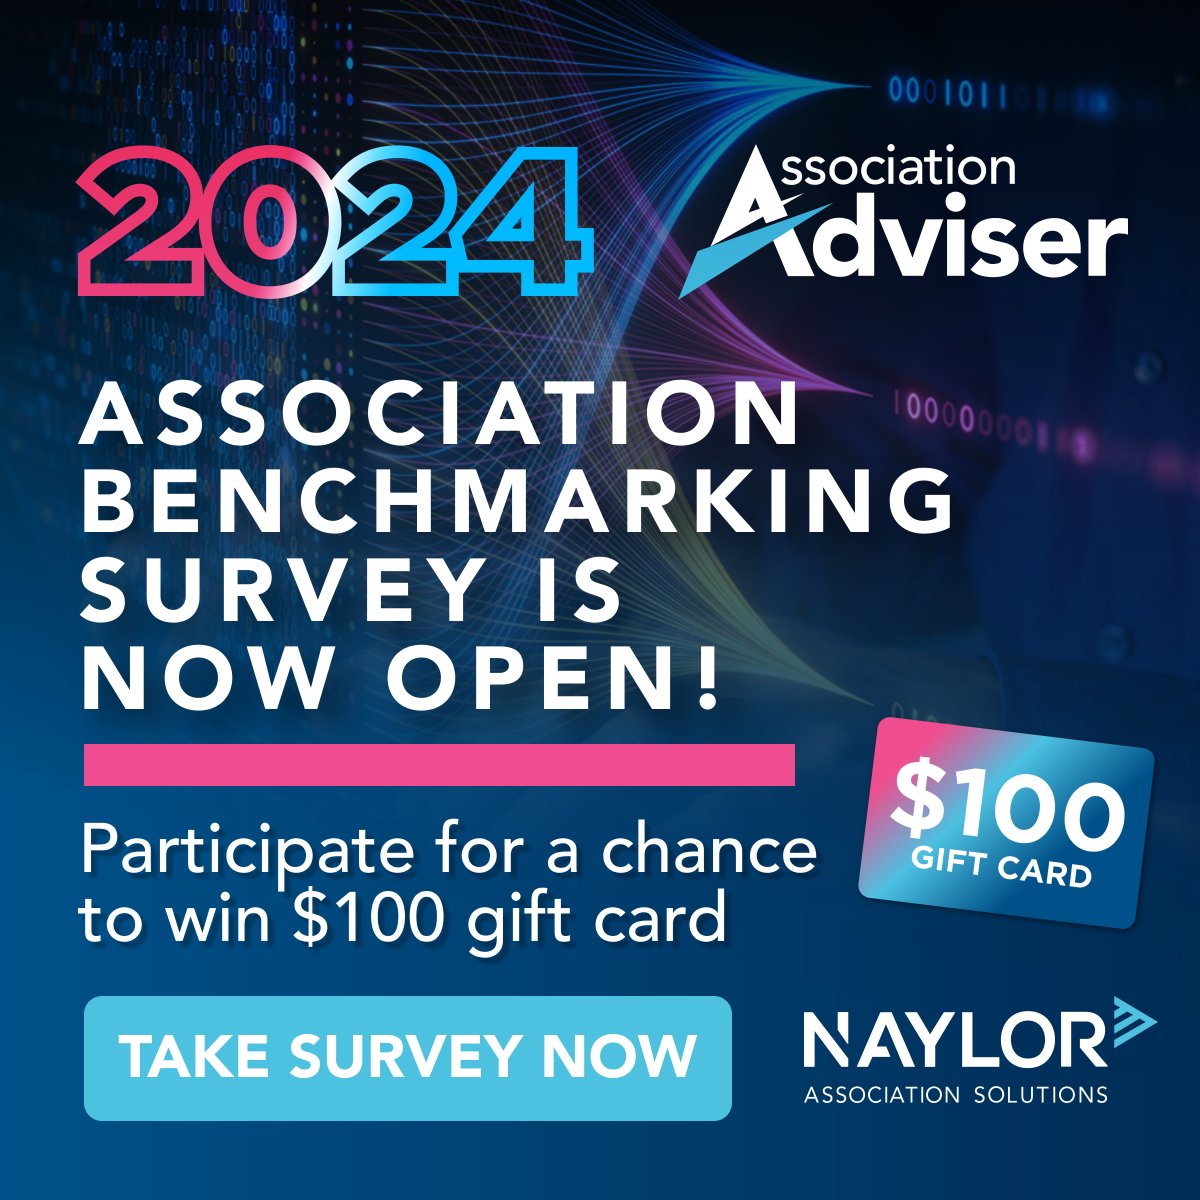 🚨 Don't miss out! Today is the LAST day to have your voice heard in the 2024 Association Benchmarking Survey. Share your insights and help shape the future of associations. Take the survey now: ow.ly/KF4e50Ro2Pf #AssociationSurvey #Benchmarking